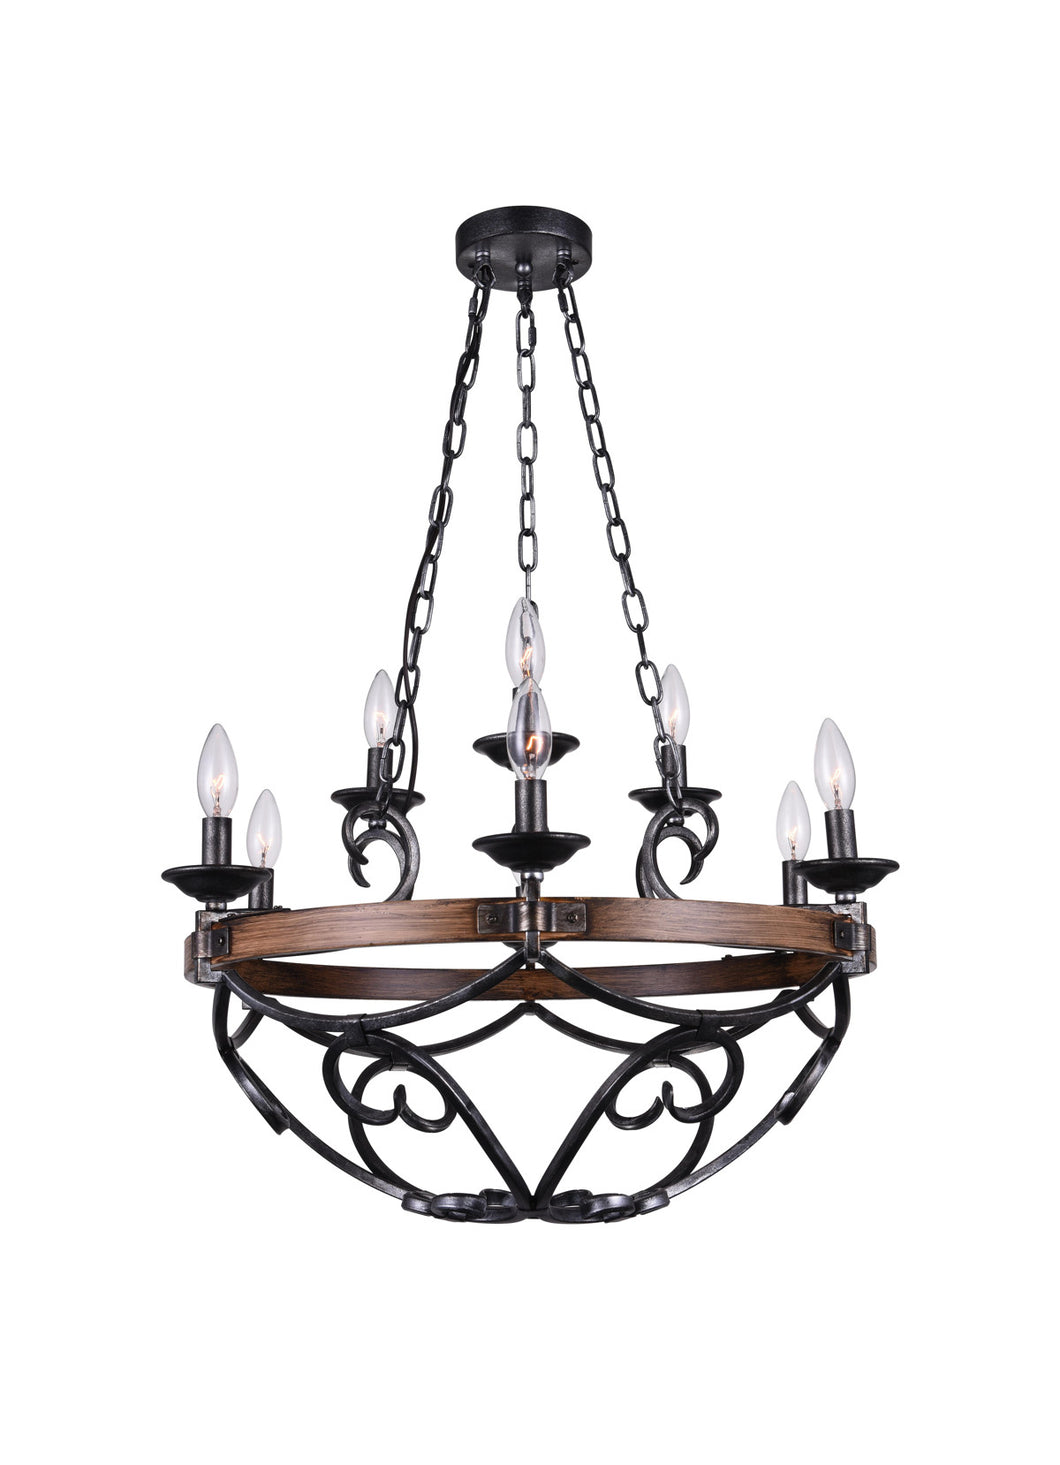 9 Light Candle Chandelier with Gun Metal finish